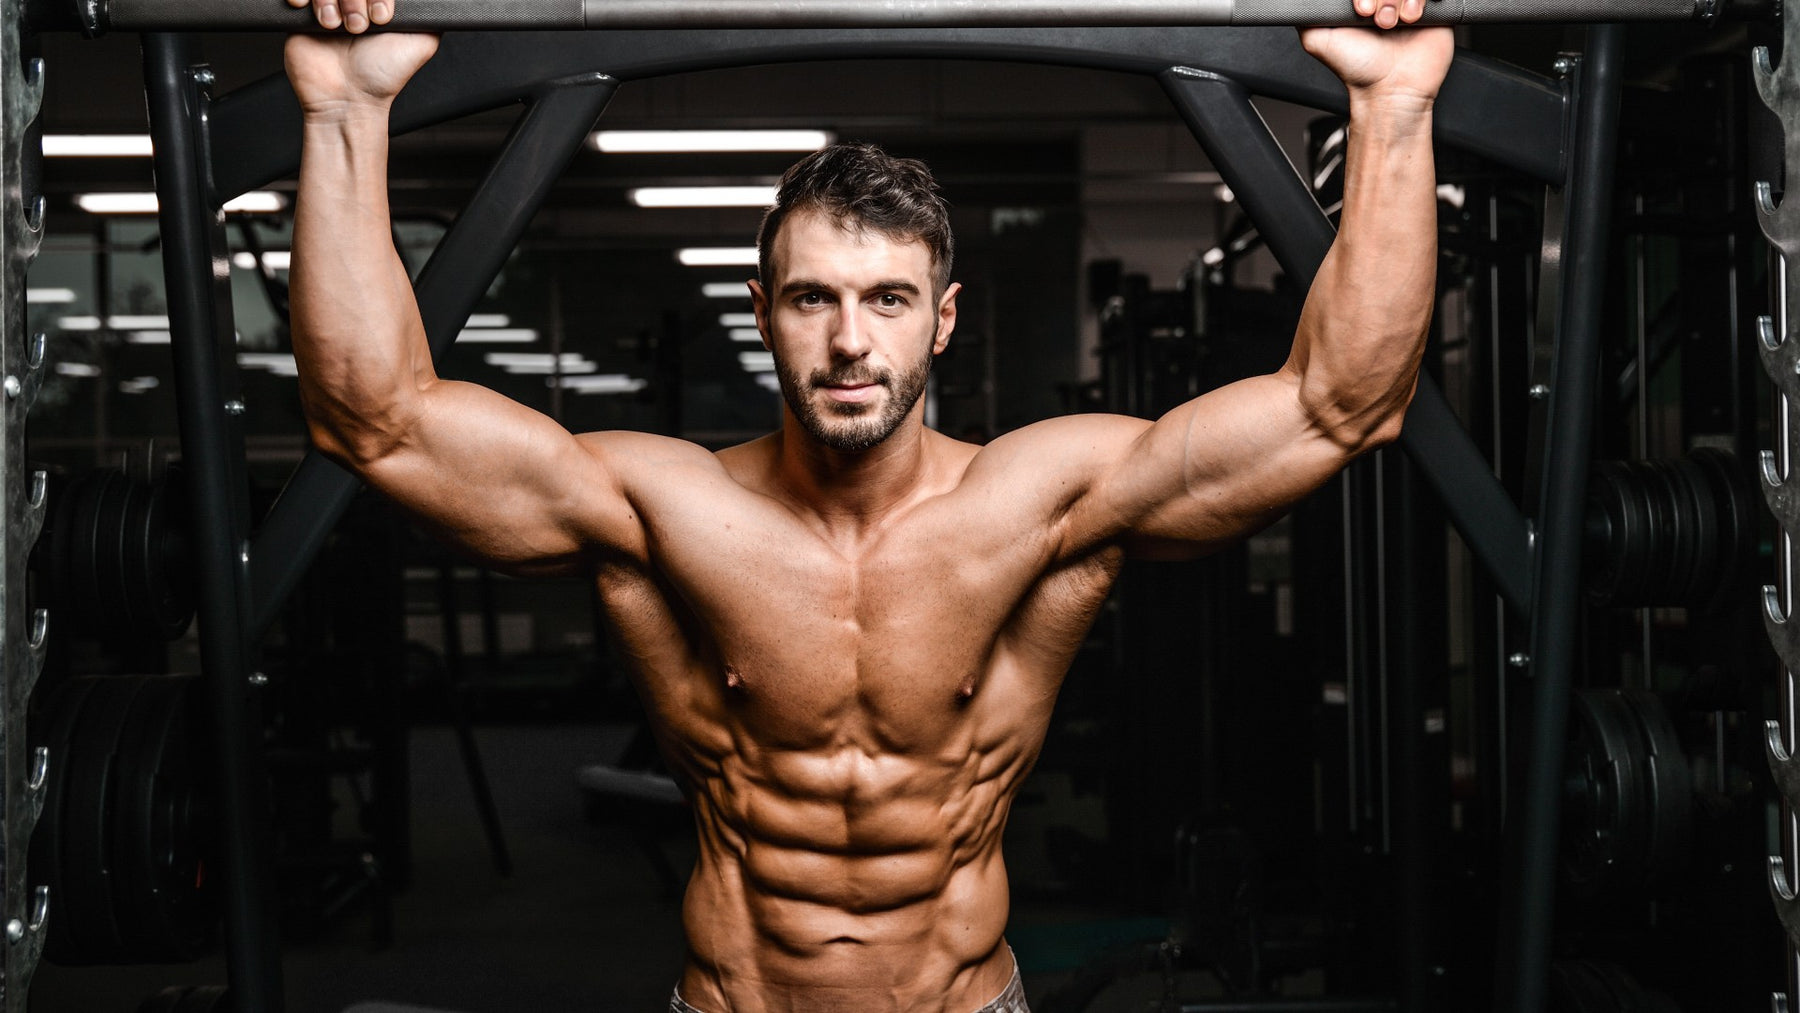 How to Gain Muscle: 7 Proven Beginner Tips